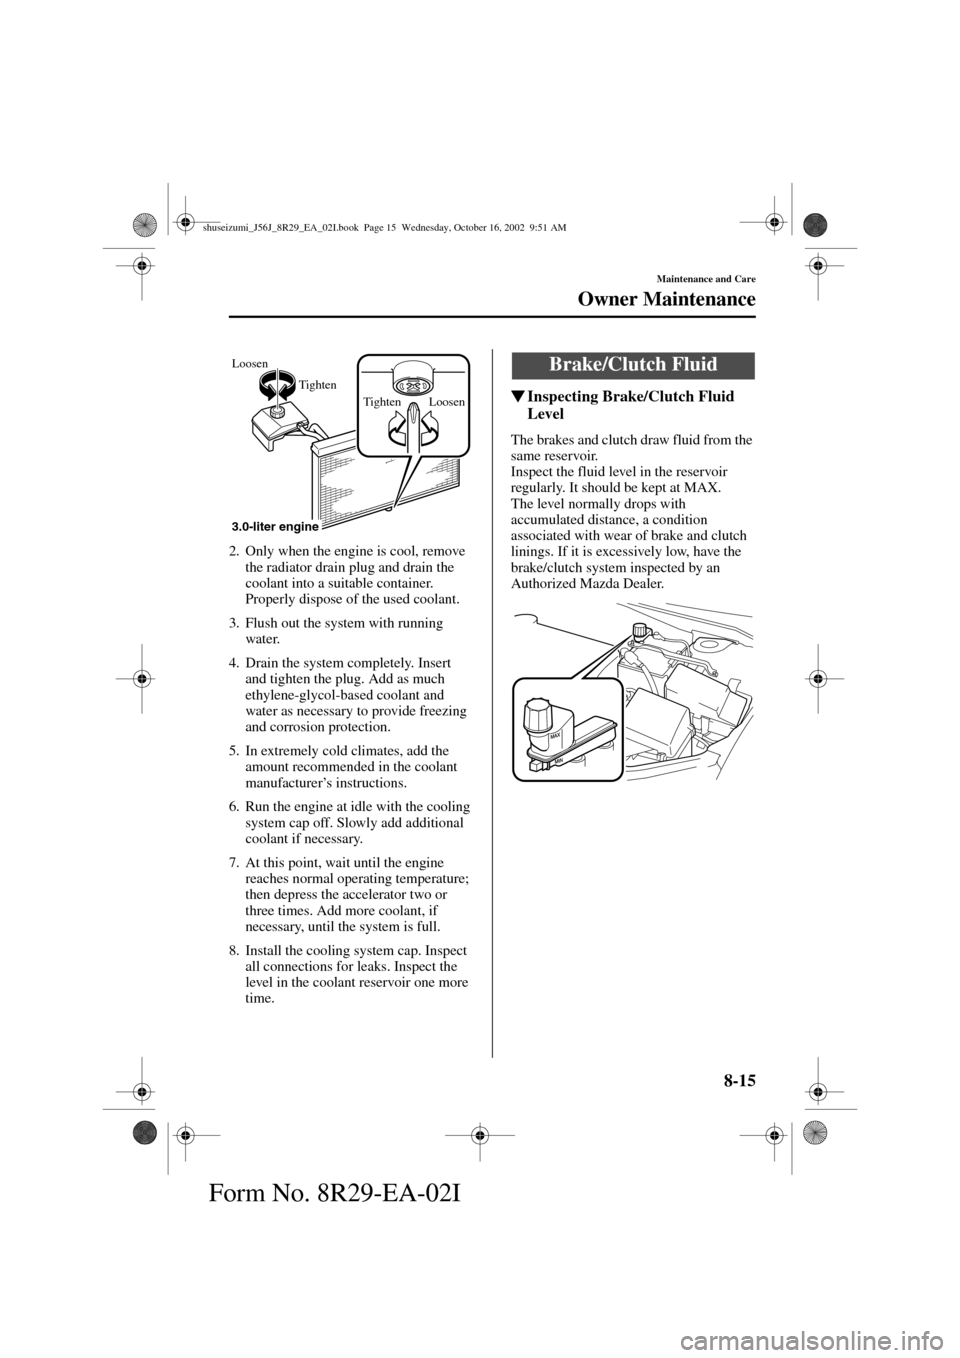 MAZDA MODEL 6 2003  Owners Manual (in English) 8-15
Maintenance and Care
Owner Maintenance
Form No. 8R29-EA-02I
2. Only when the engine is cool, remove 
the radiator drain plug and drain the 
coolant into a suitable container. 
Properly dispose of